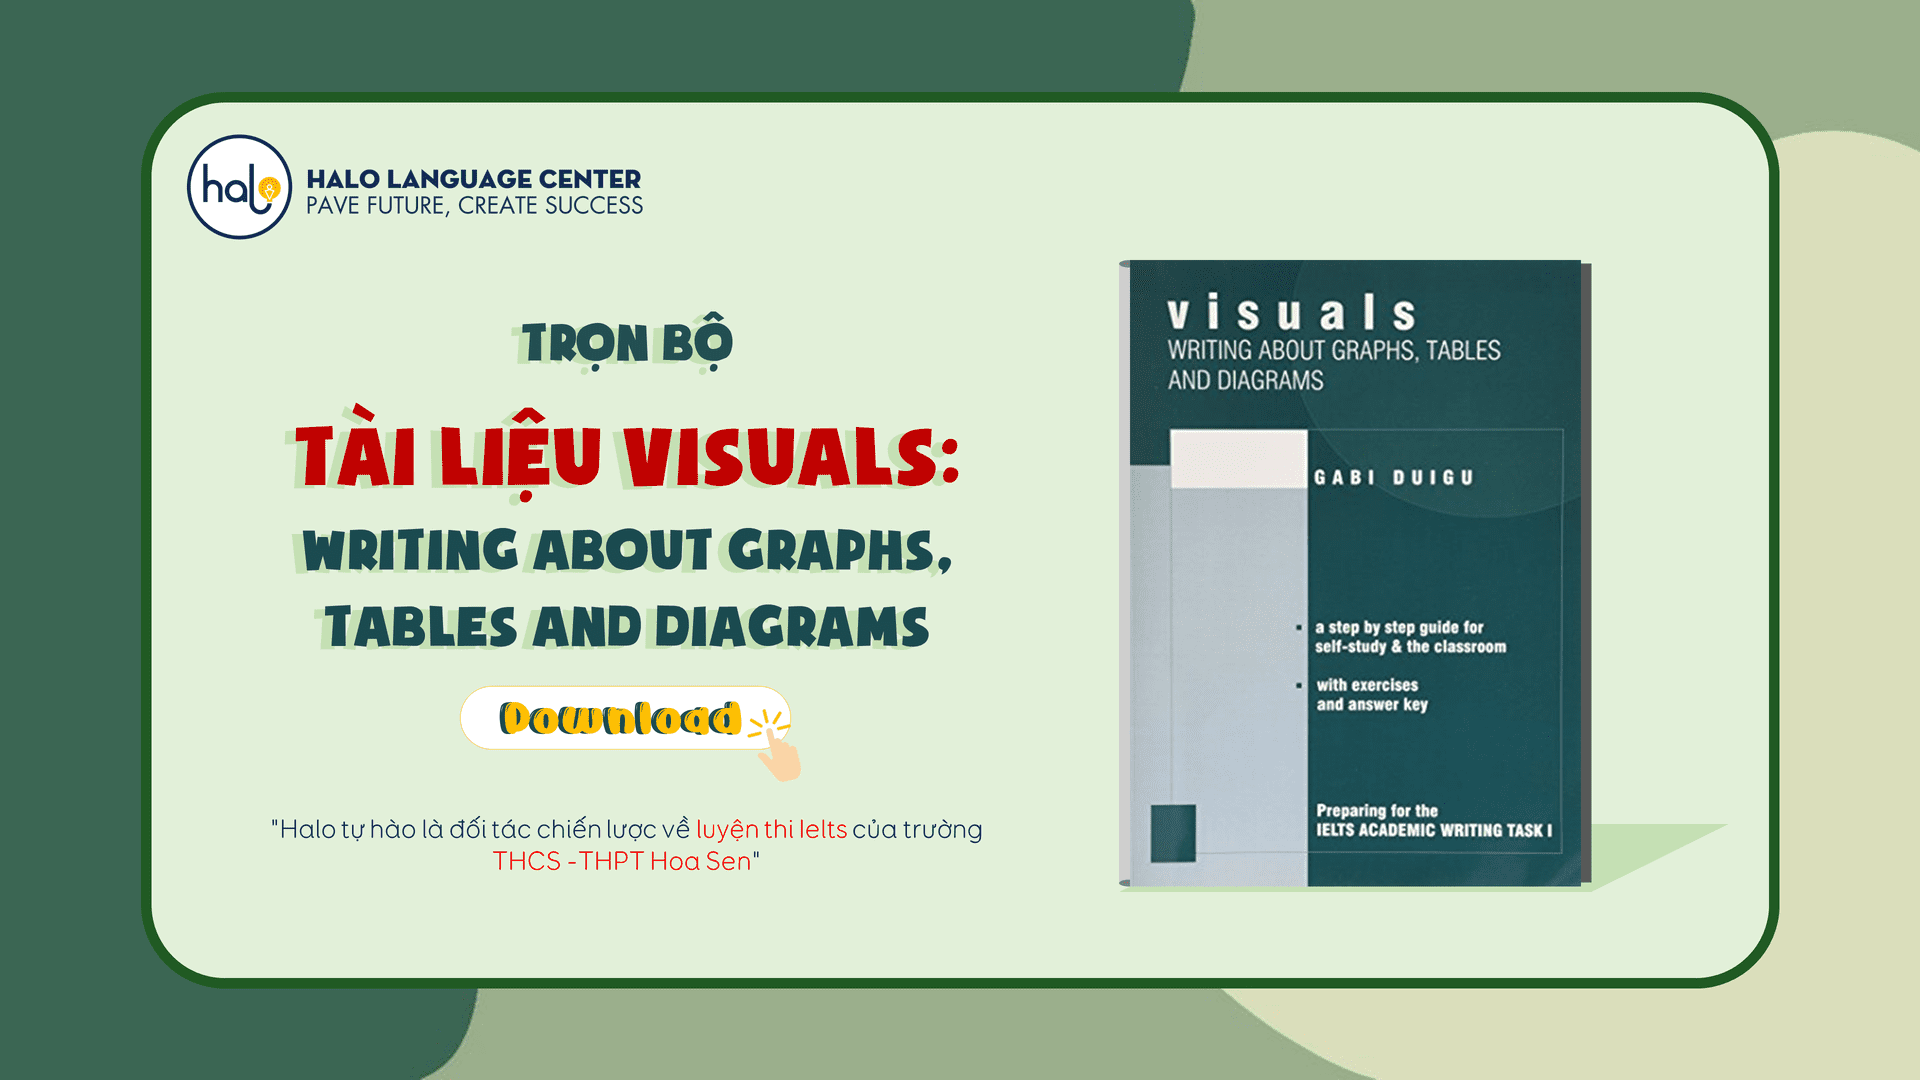 Trọn bộ tài liệu Visuals Writing about Graphs, Tables and Diagrams